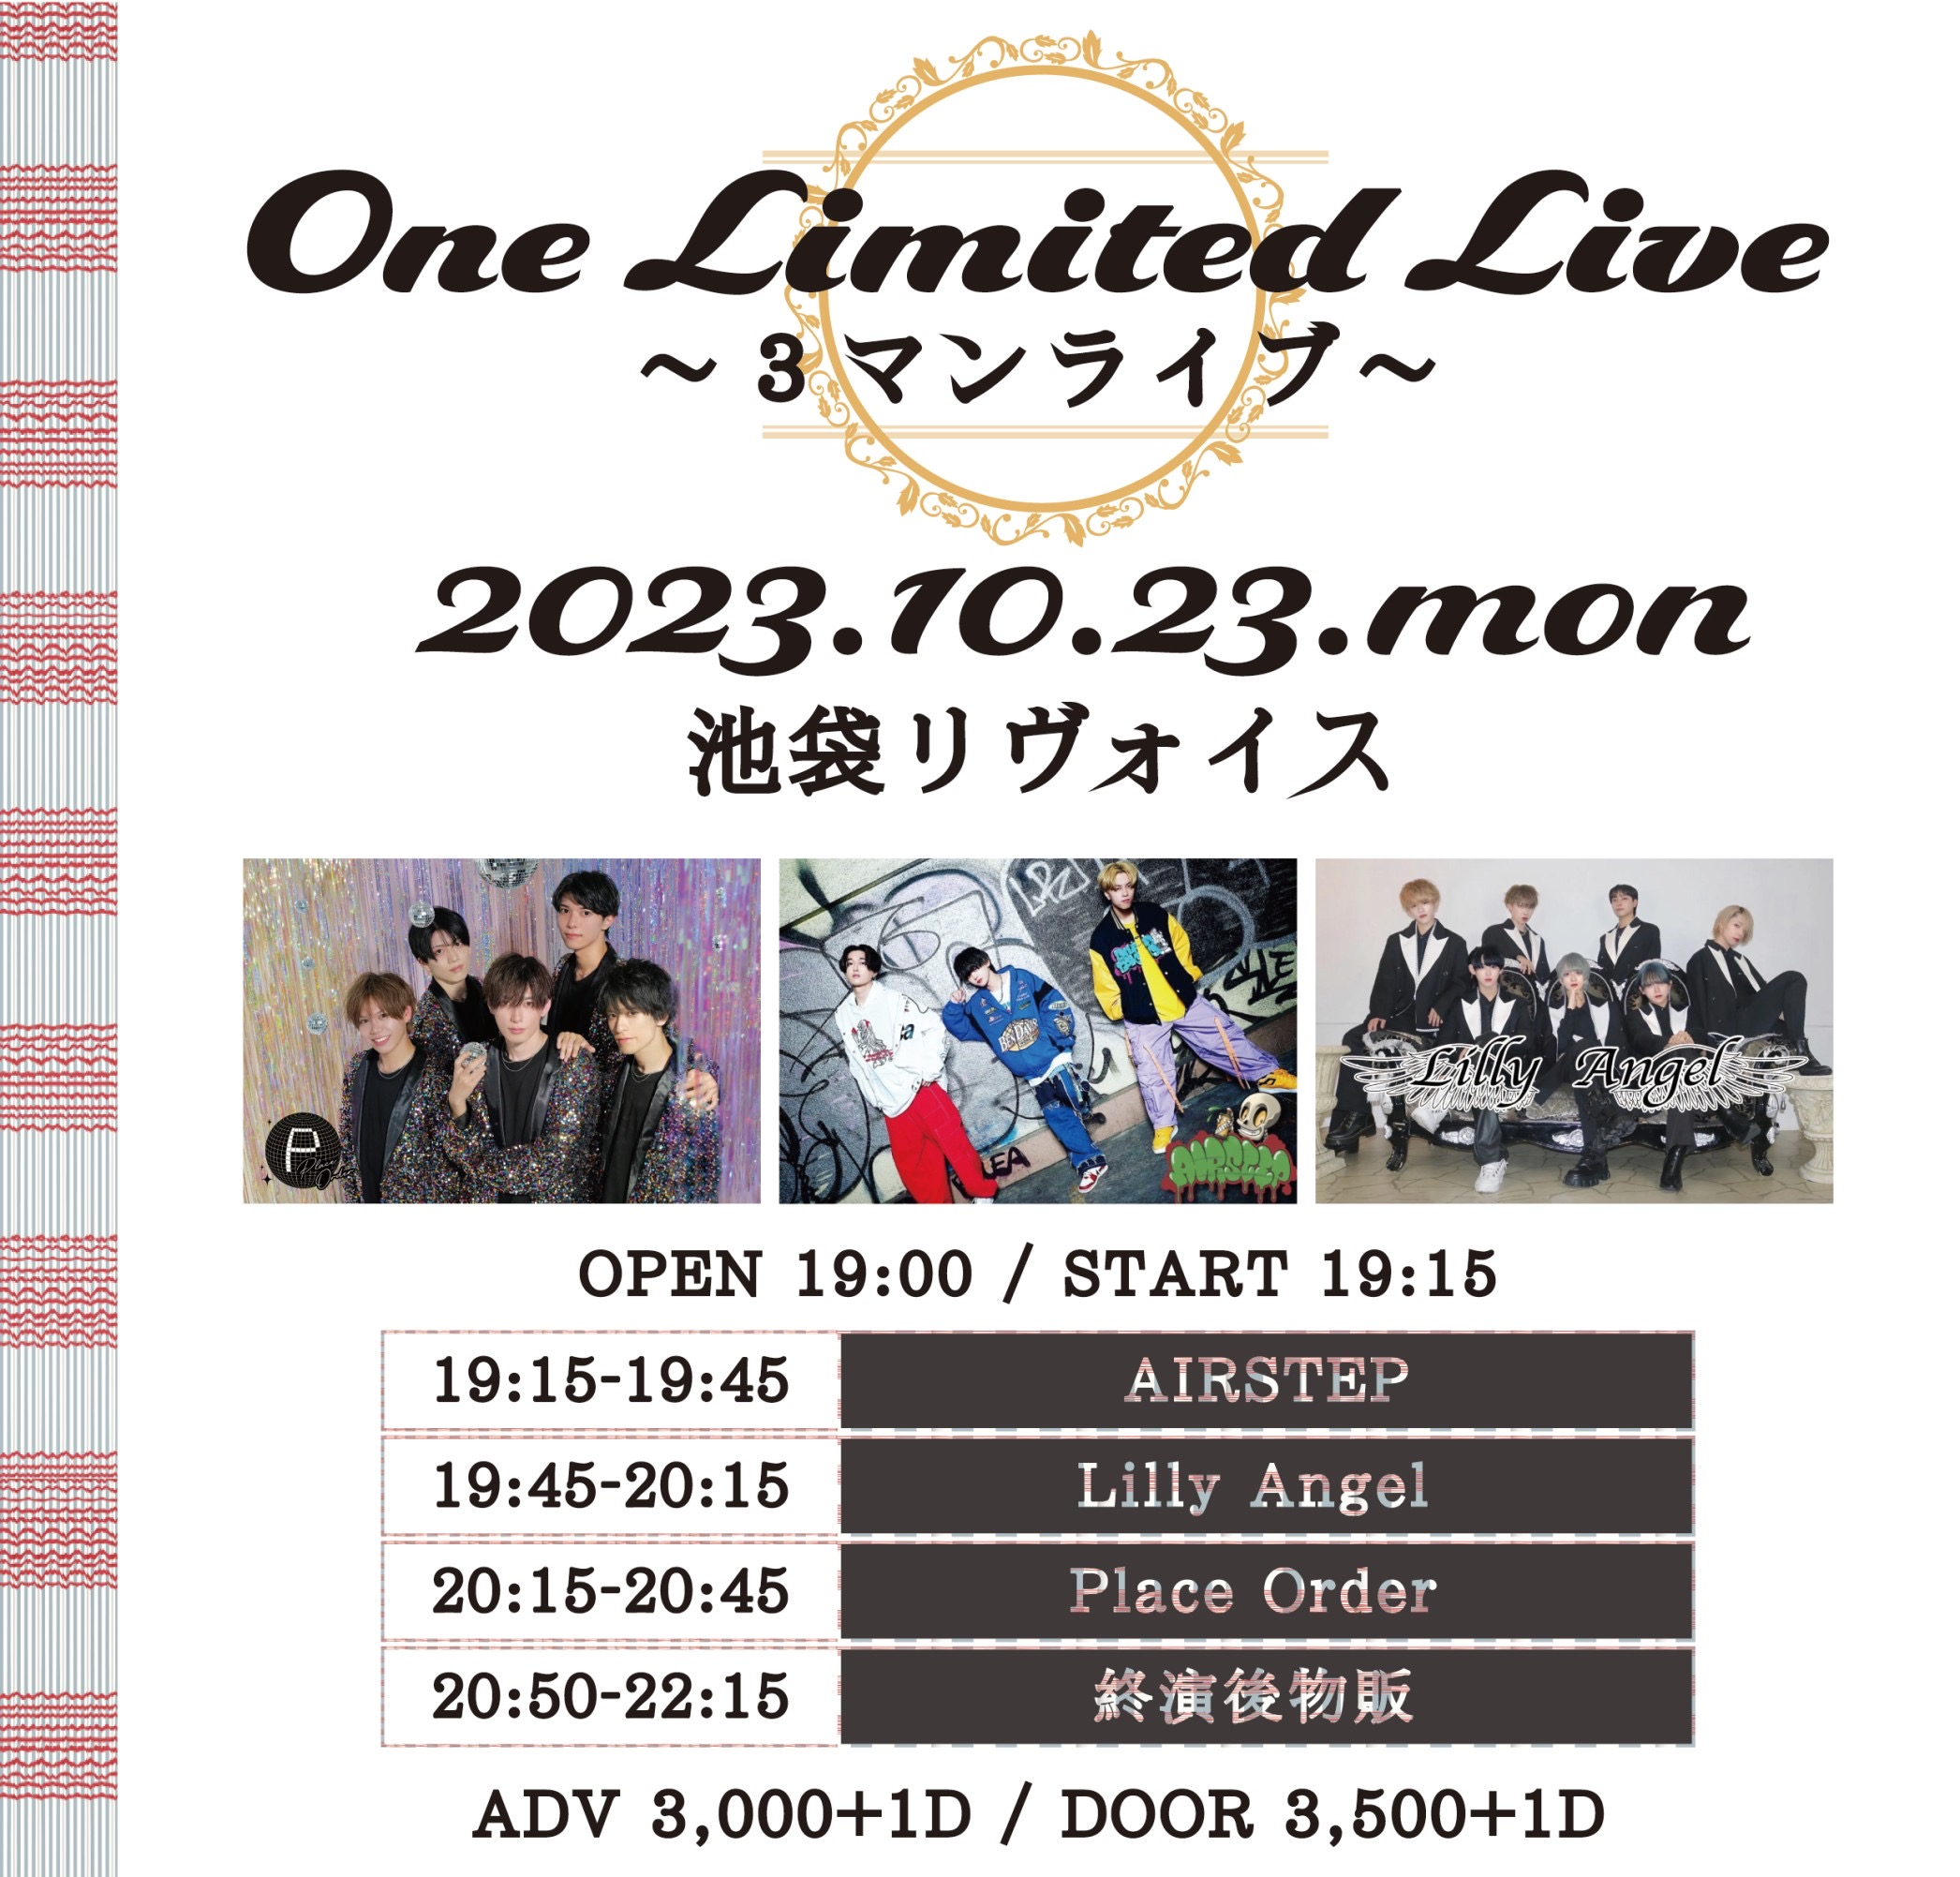 One Limited Live〜３マンライブ〜